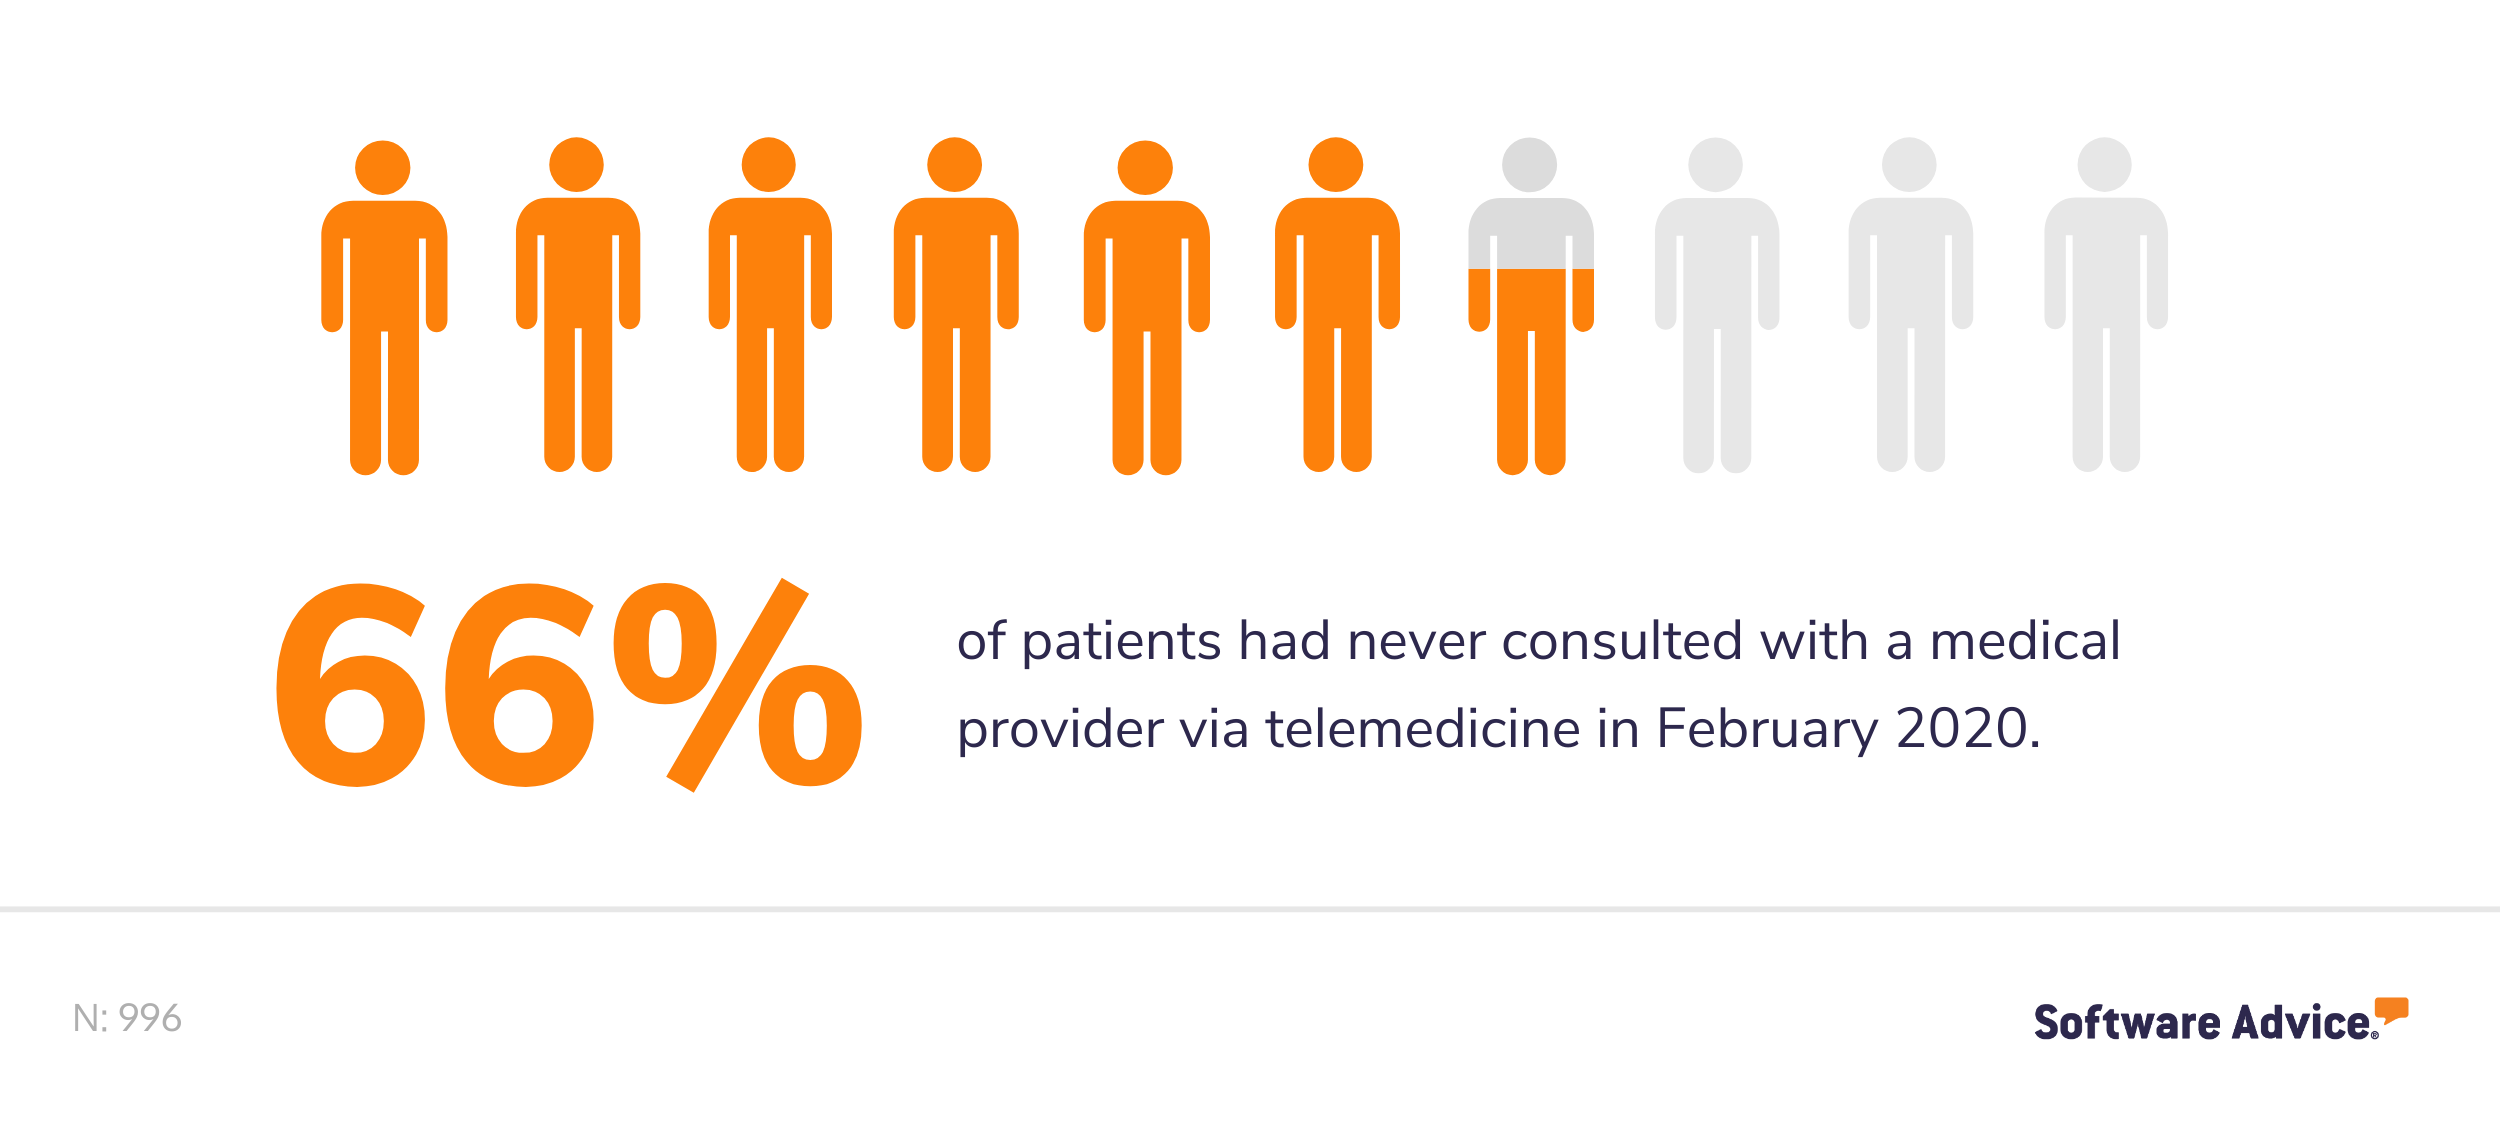 66%-of-patients-have-not-consulted-with-their-provider-via-telemedicine